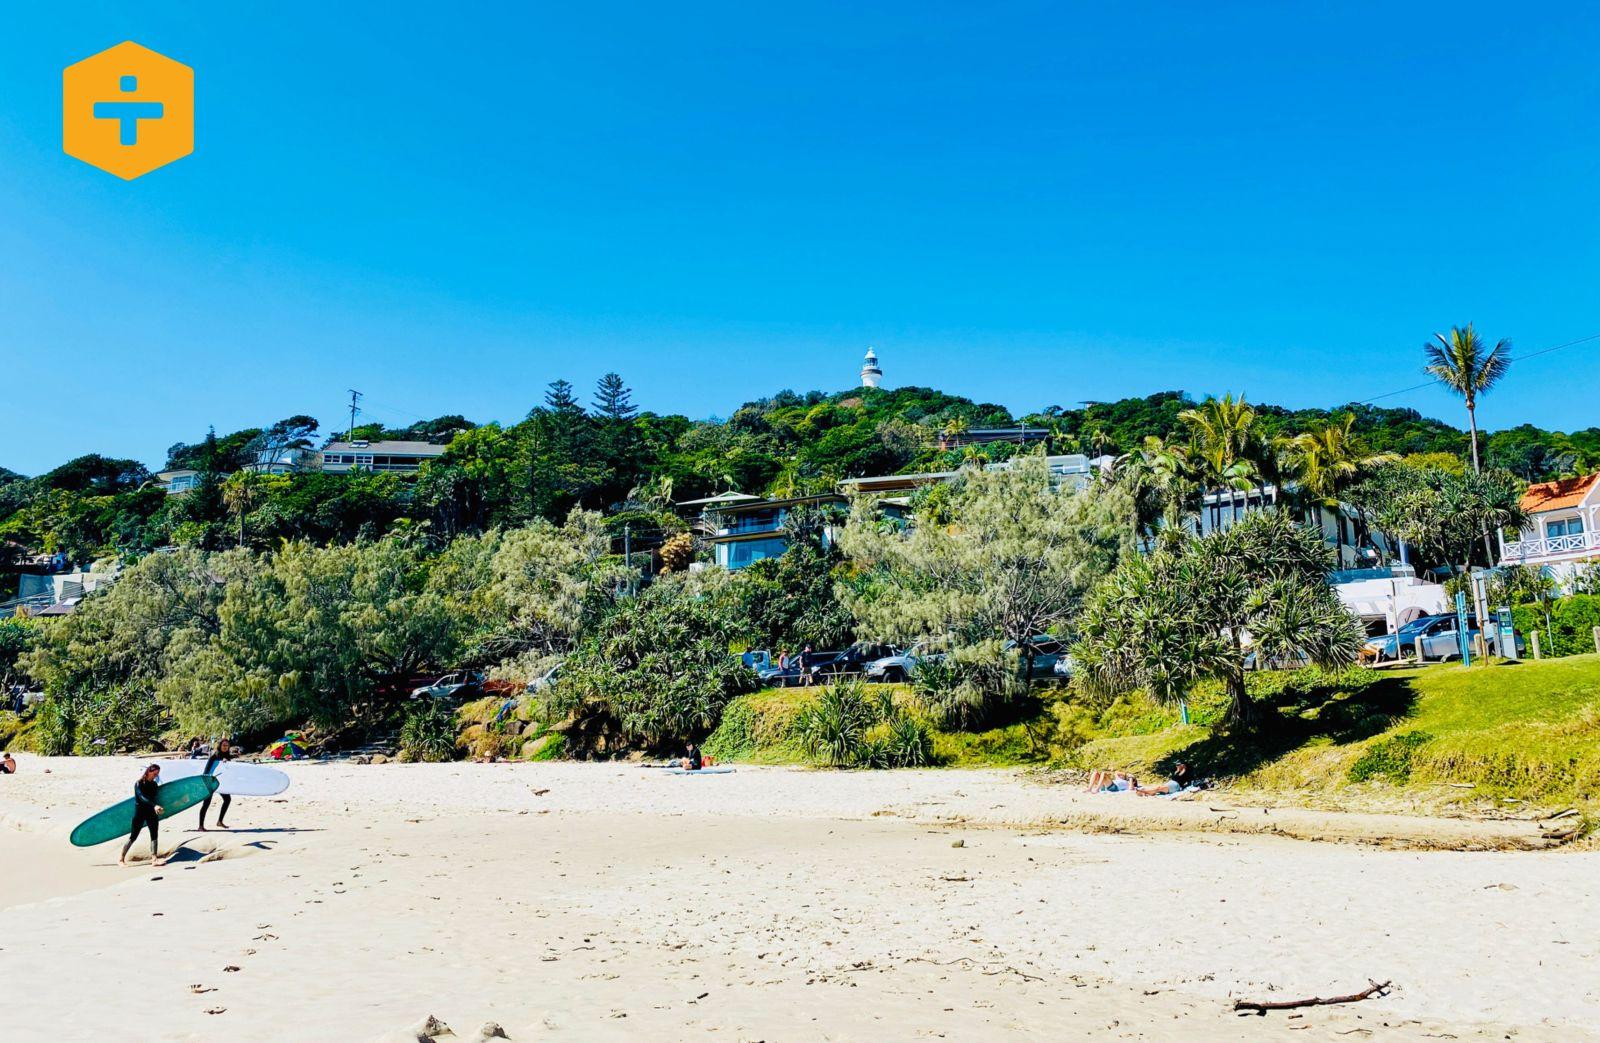 Short term accomodation through the likes of Airbnb is being cut in Byron Bay leading to broader implications for the property market.